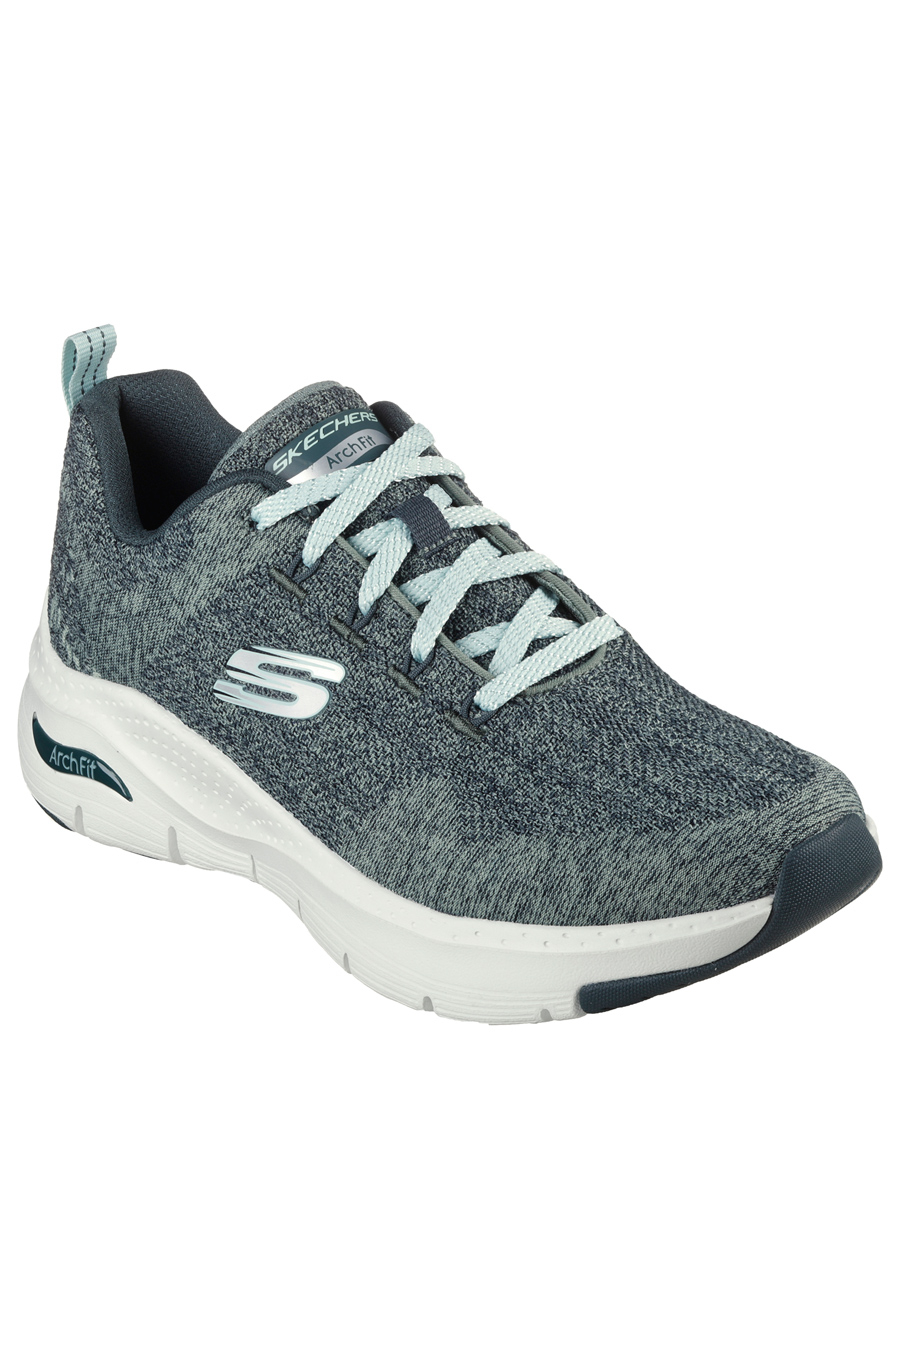 SKECHERS ARCH FIT COMFY WAVE SNEAKERS verde per donna